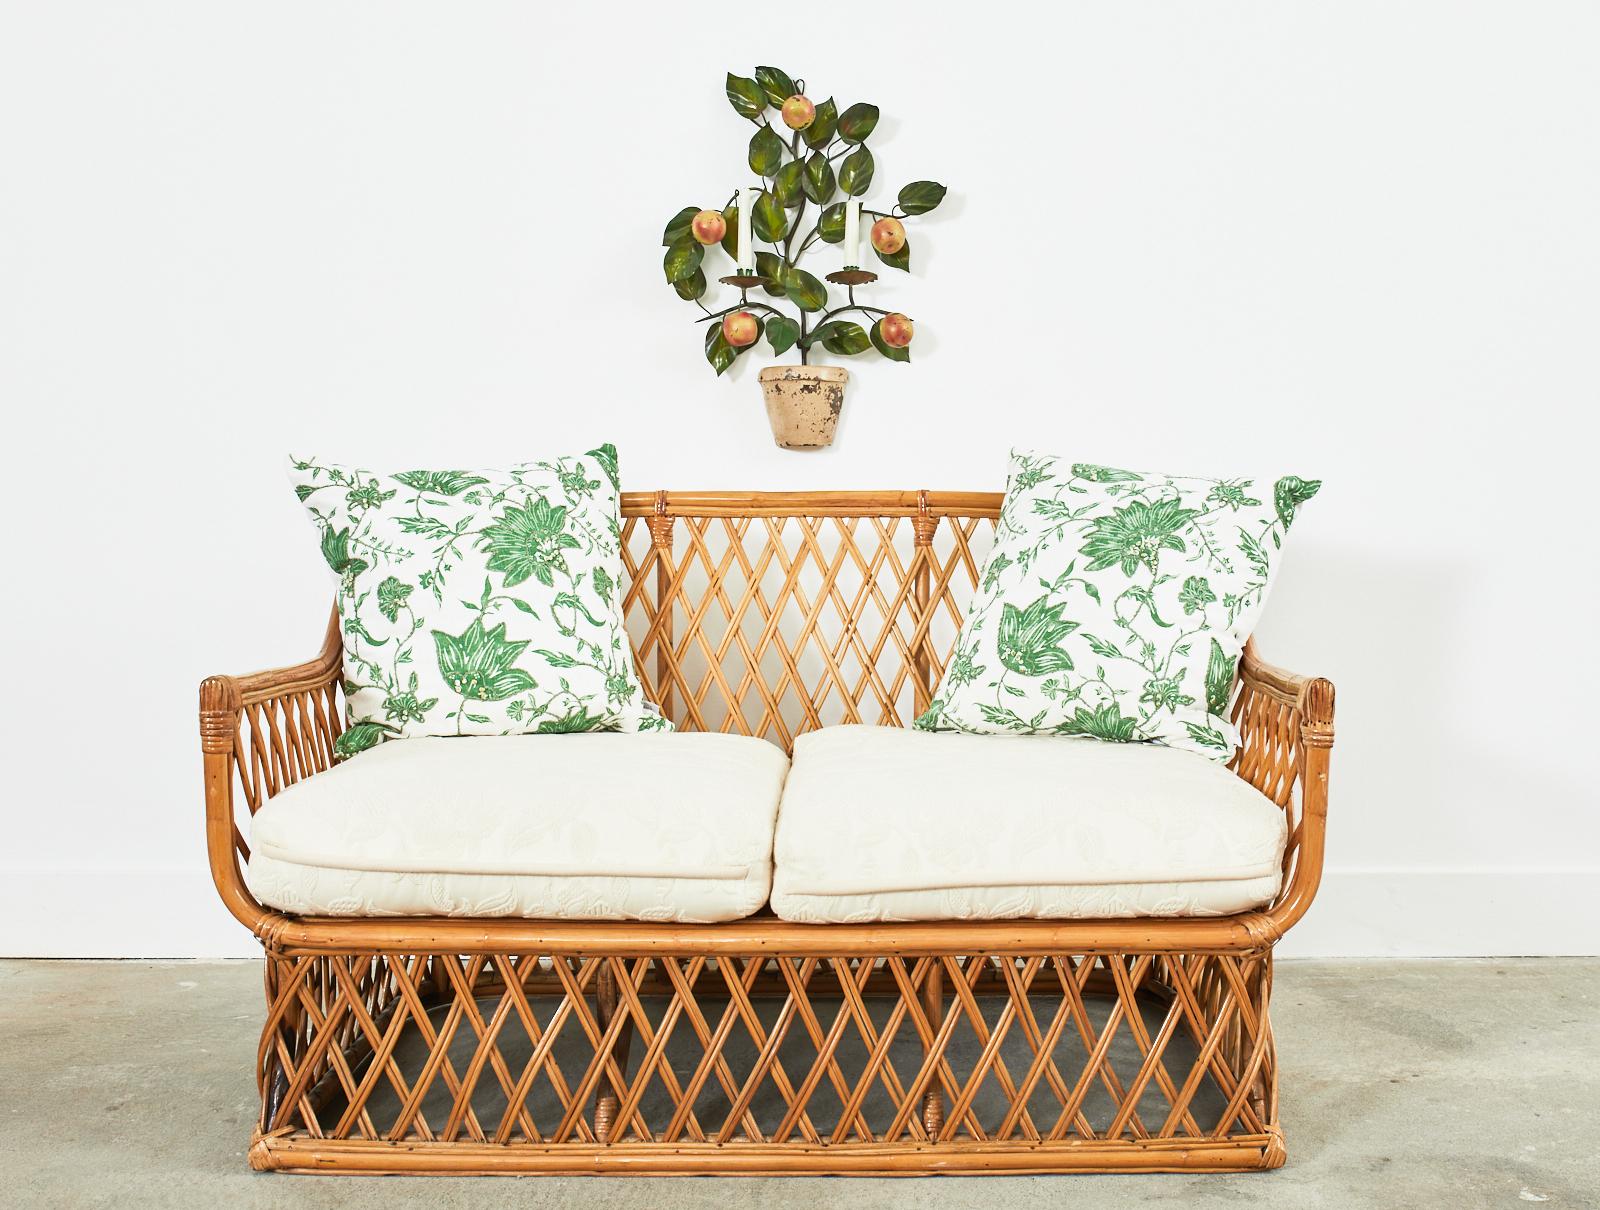 Charming mid-century Italian organic modern settee or loveseat hand-crafted from bamboo and rattan. The bamboo frame features geometric woven lattice sides and back constructed from pencil reed rattan. The back gracefully curves down to the arms and